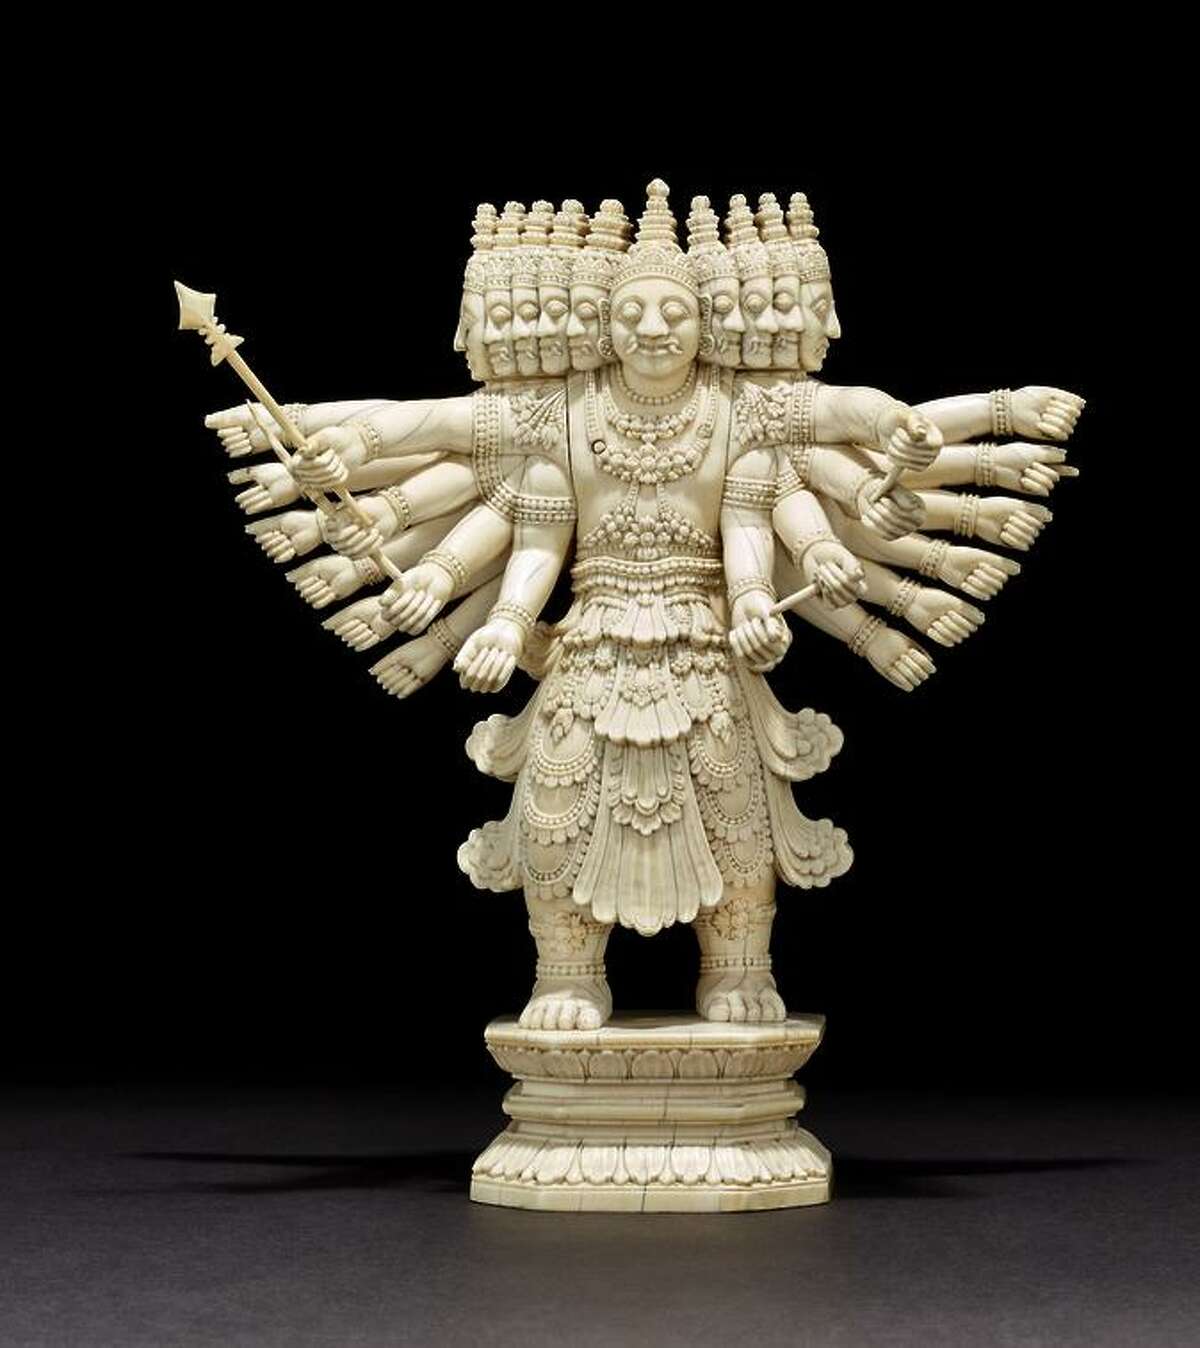 The ivory “Ravana” (c. 1800-75), depicts the 10-headed demon that abducted Rama’s wife.